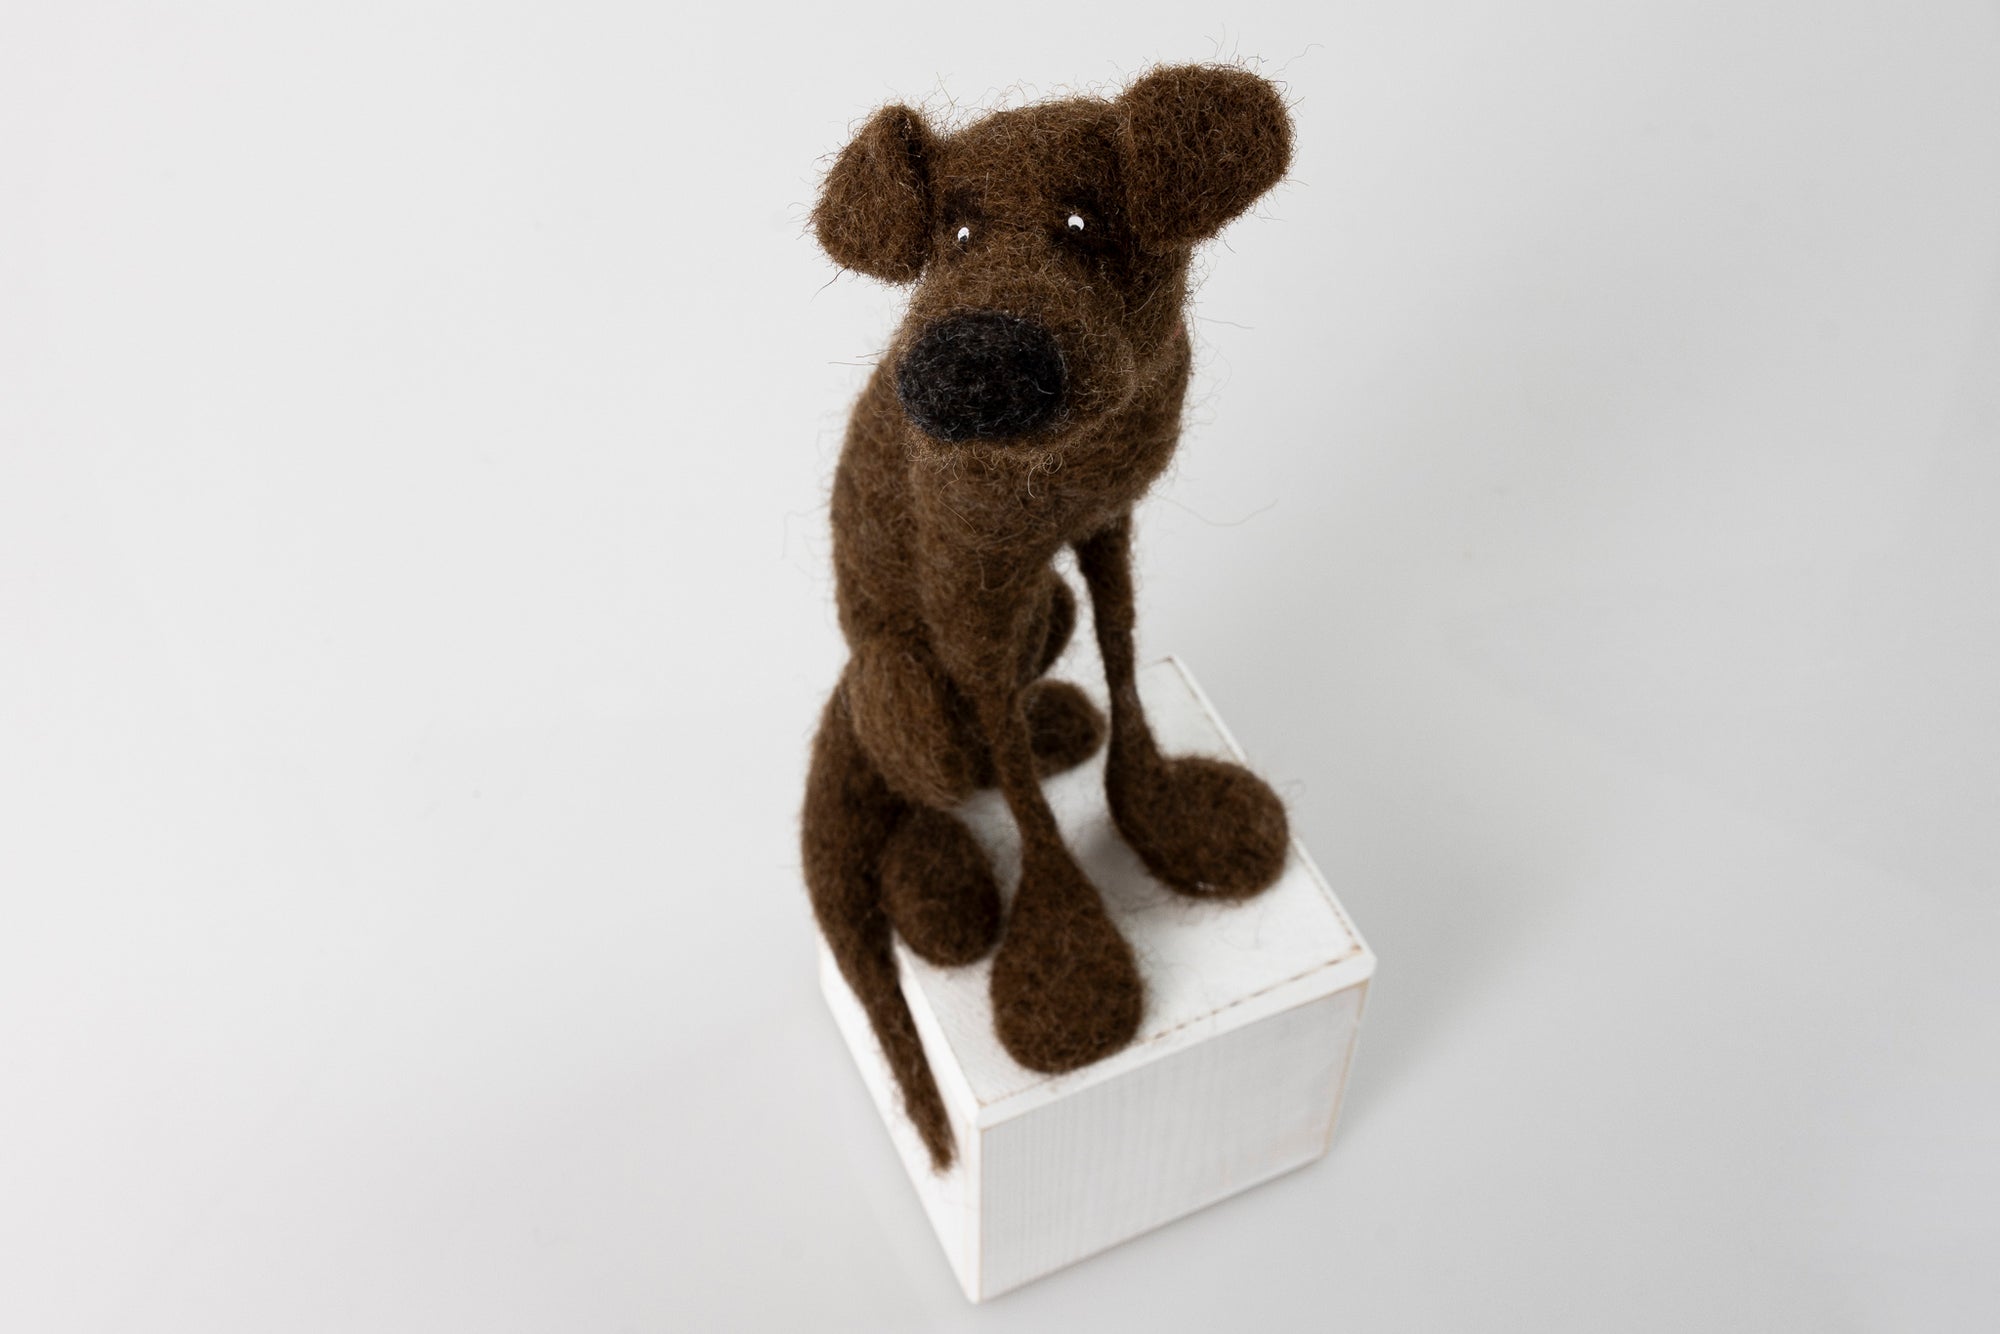 'Tyrone' needlefelt character dog by Kate Toms, available at Padstow Gallery, Cornwall